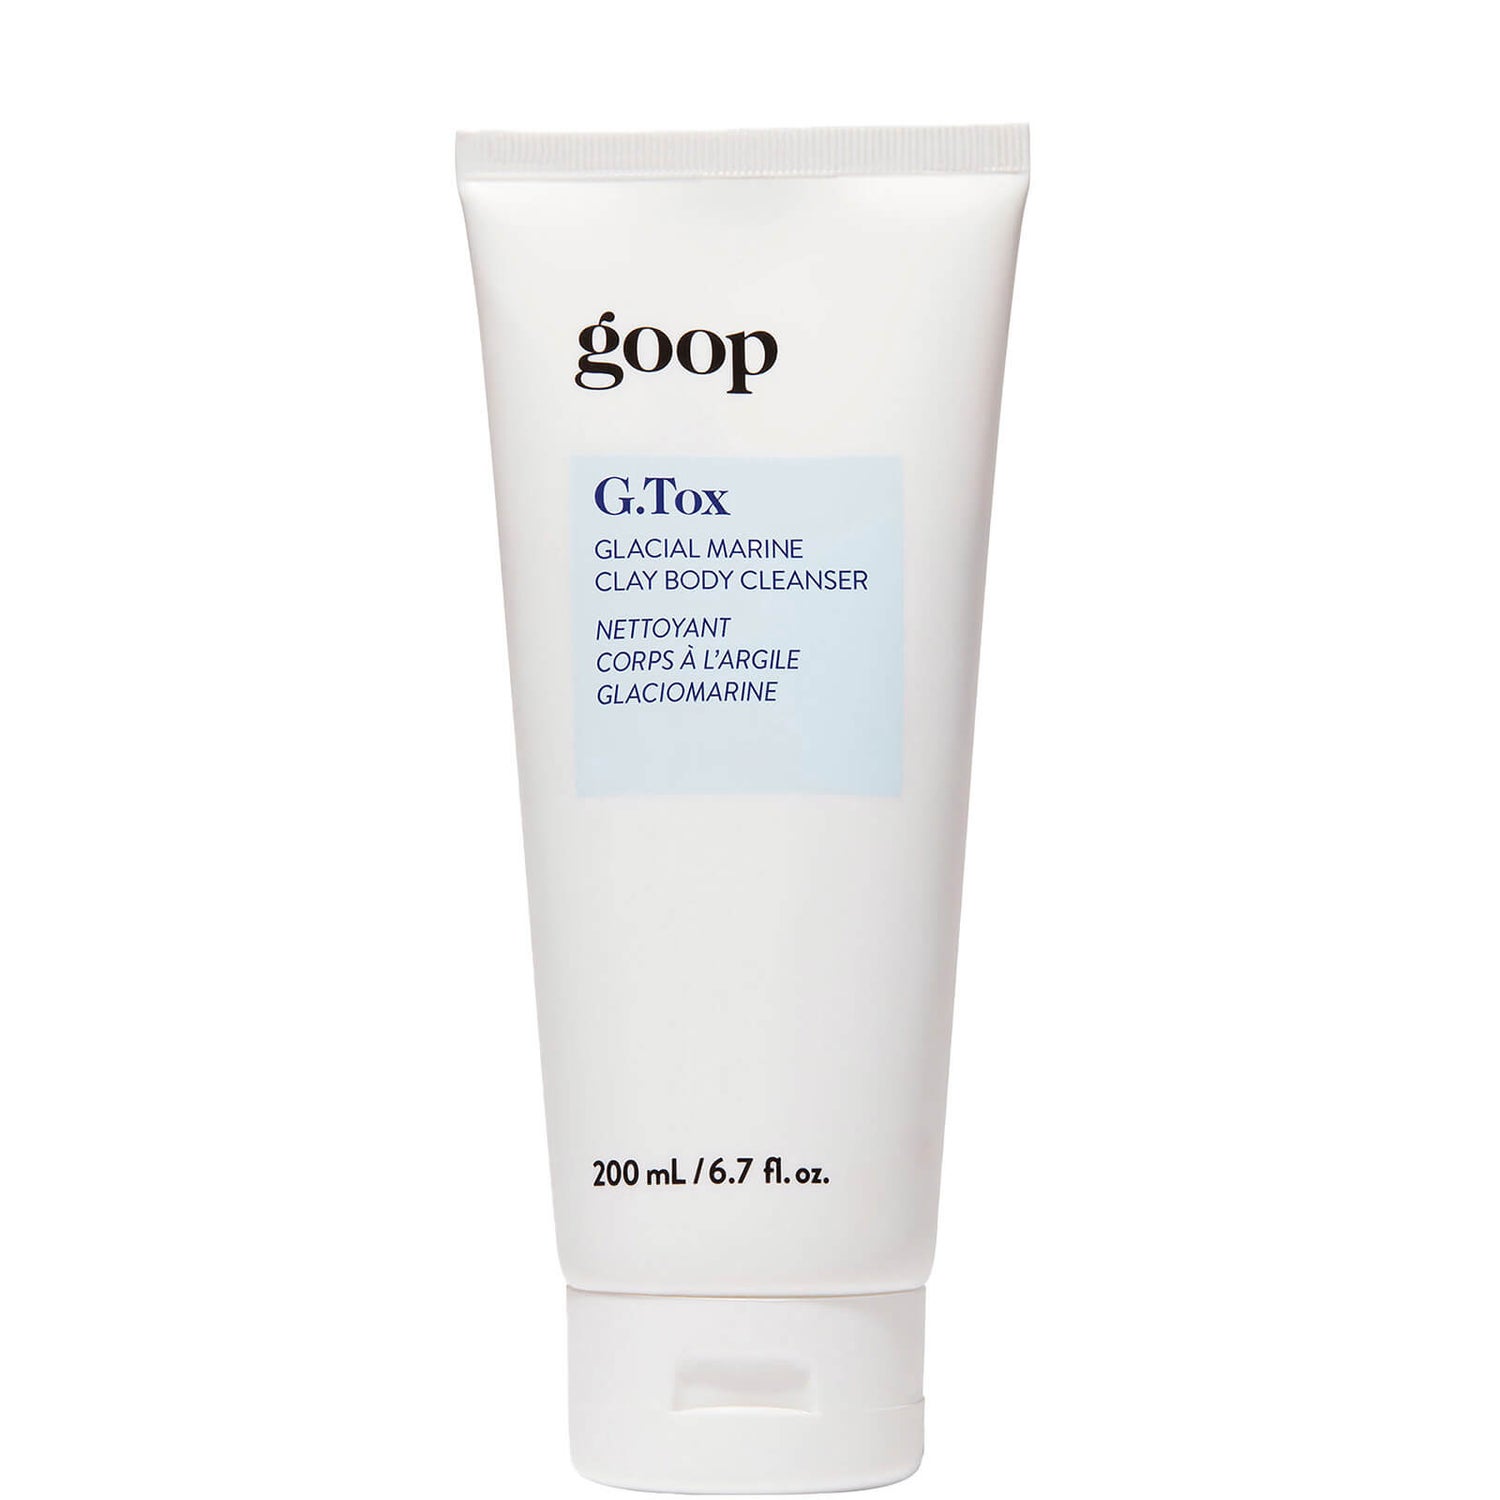 goop G.Tox Glacial Marine Clay Body Cleanser